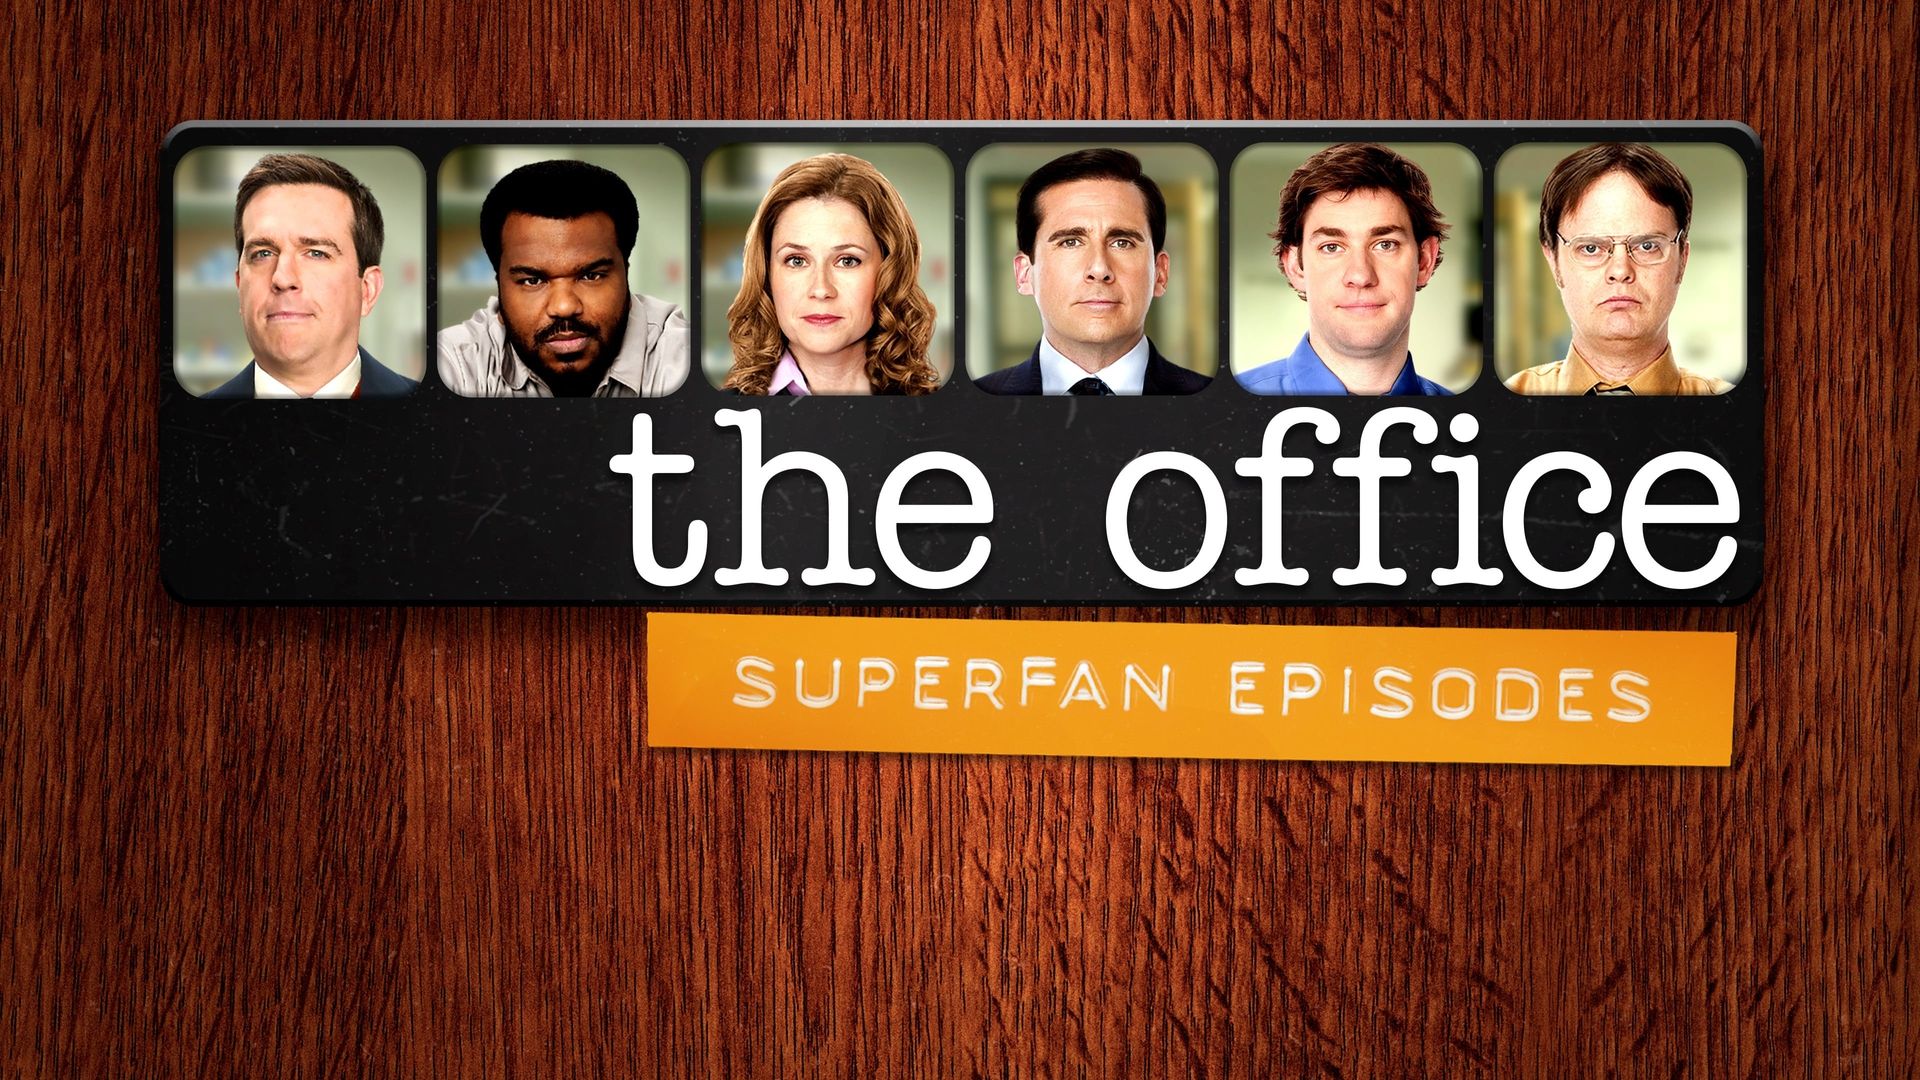 The Office: Superfan Episodes background